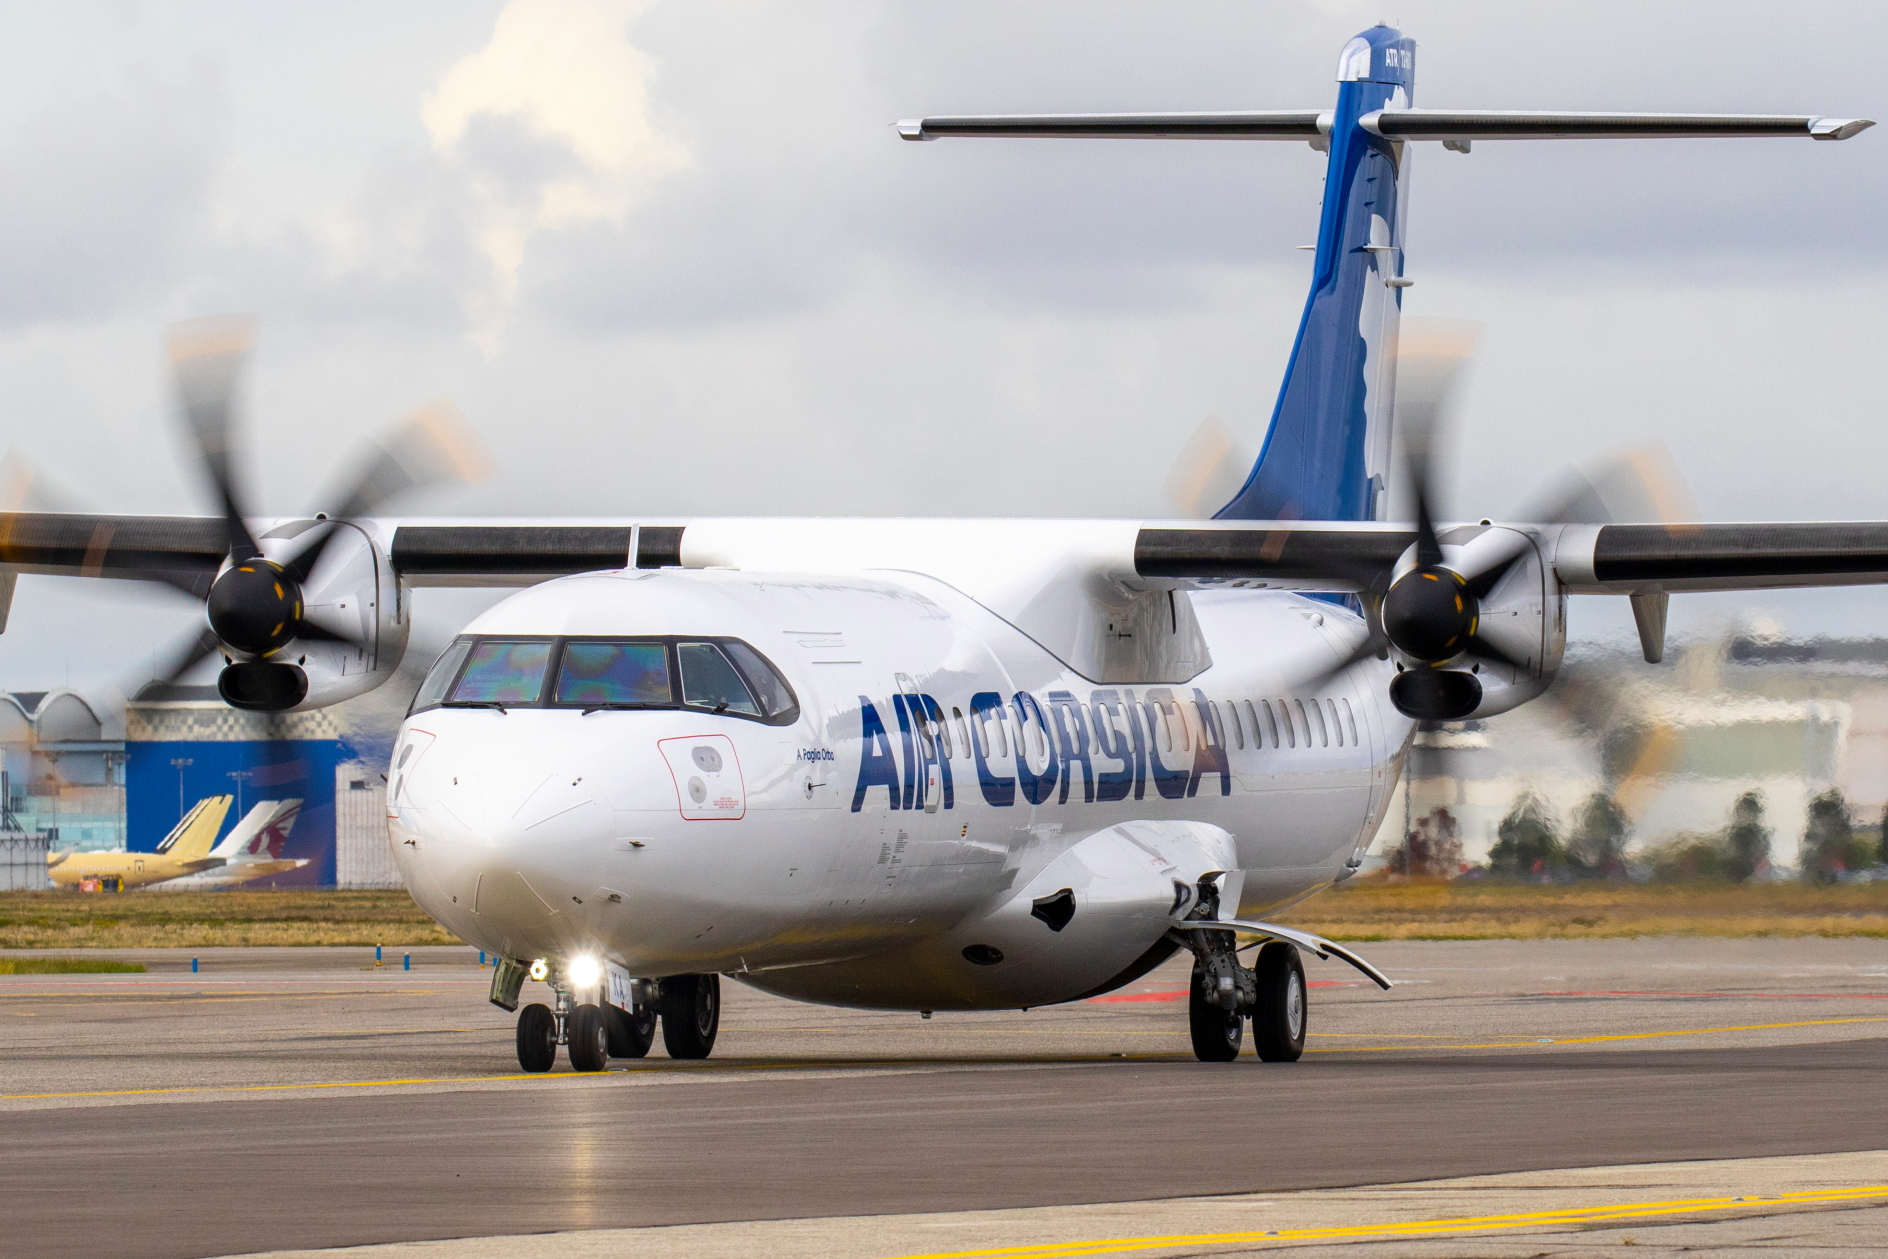 Air Corsica ATR 72-600, the first with PW127XT engines and also the first to have in-seat USB ports. Click to enlarge.